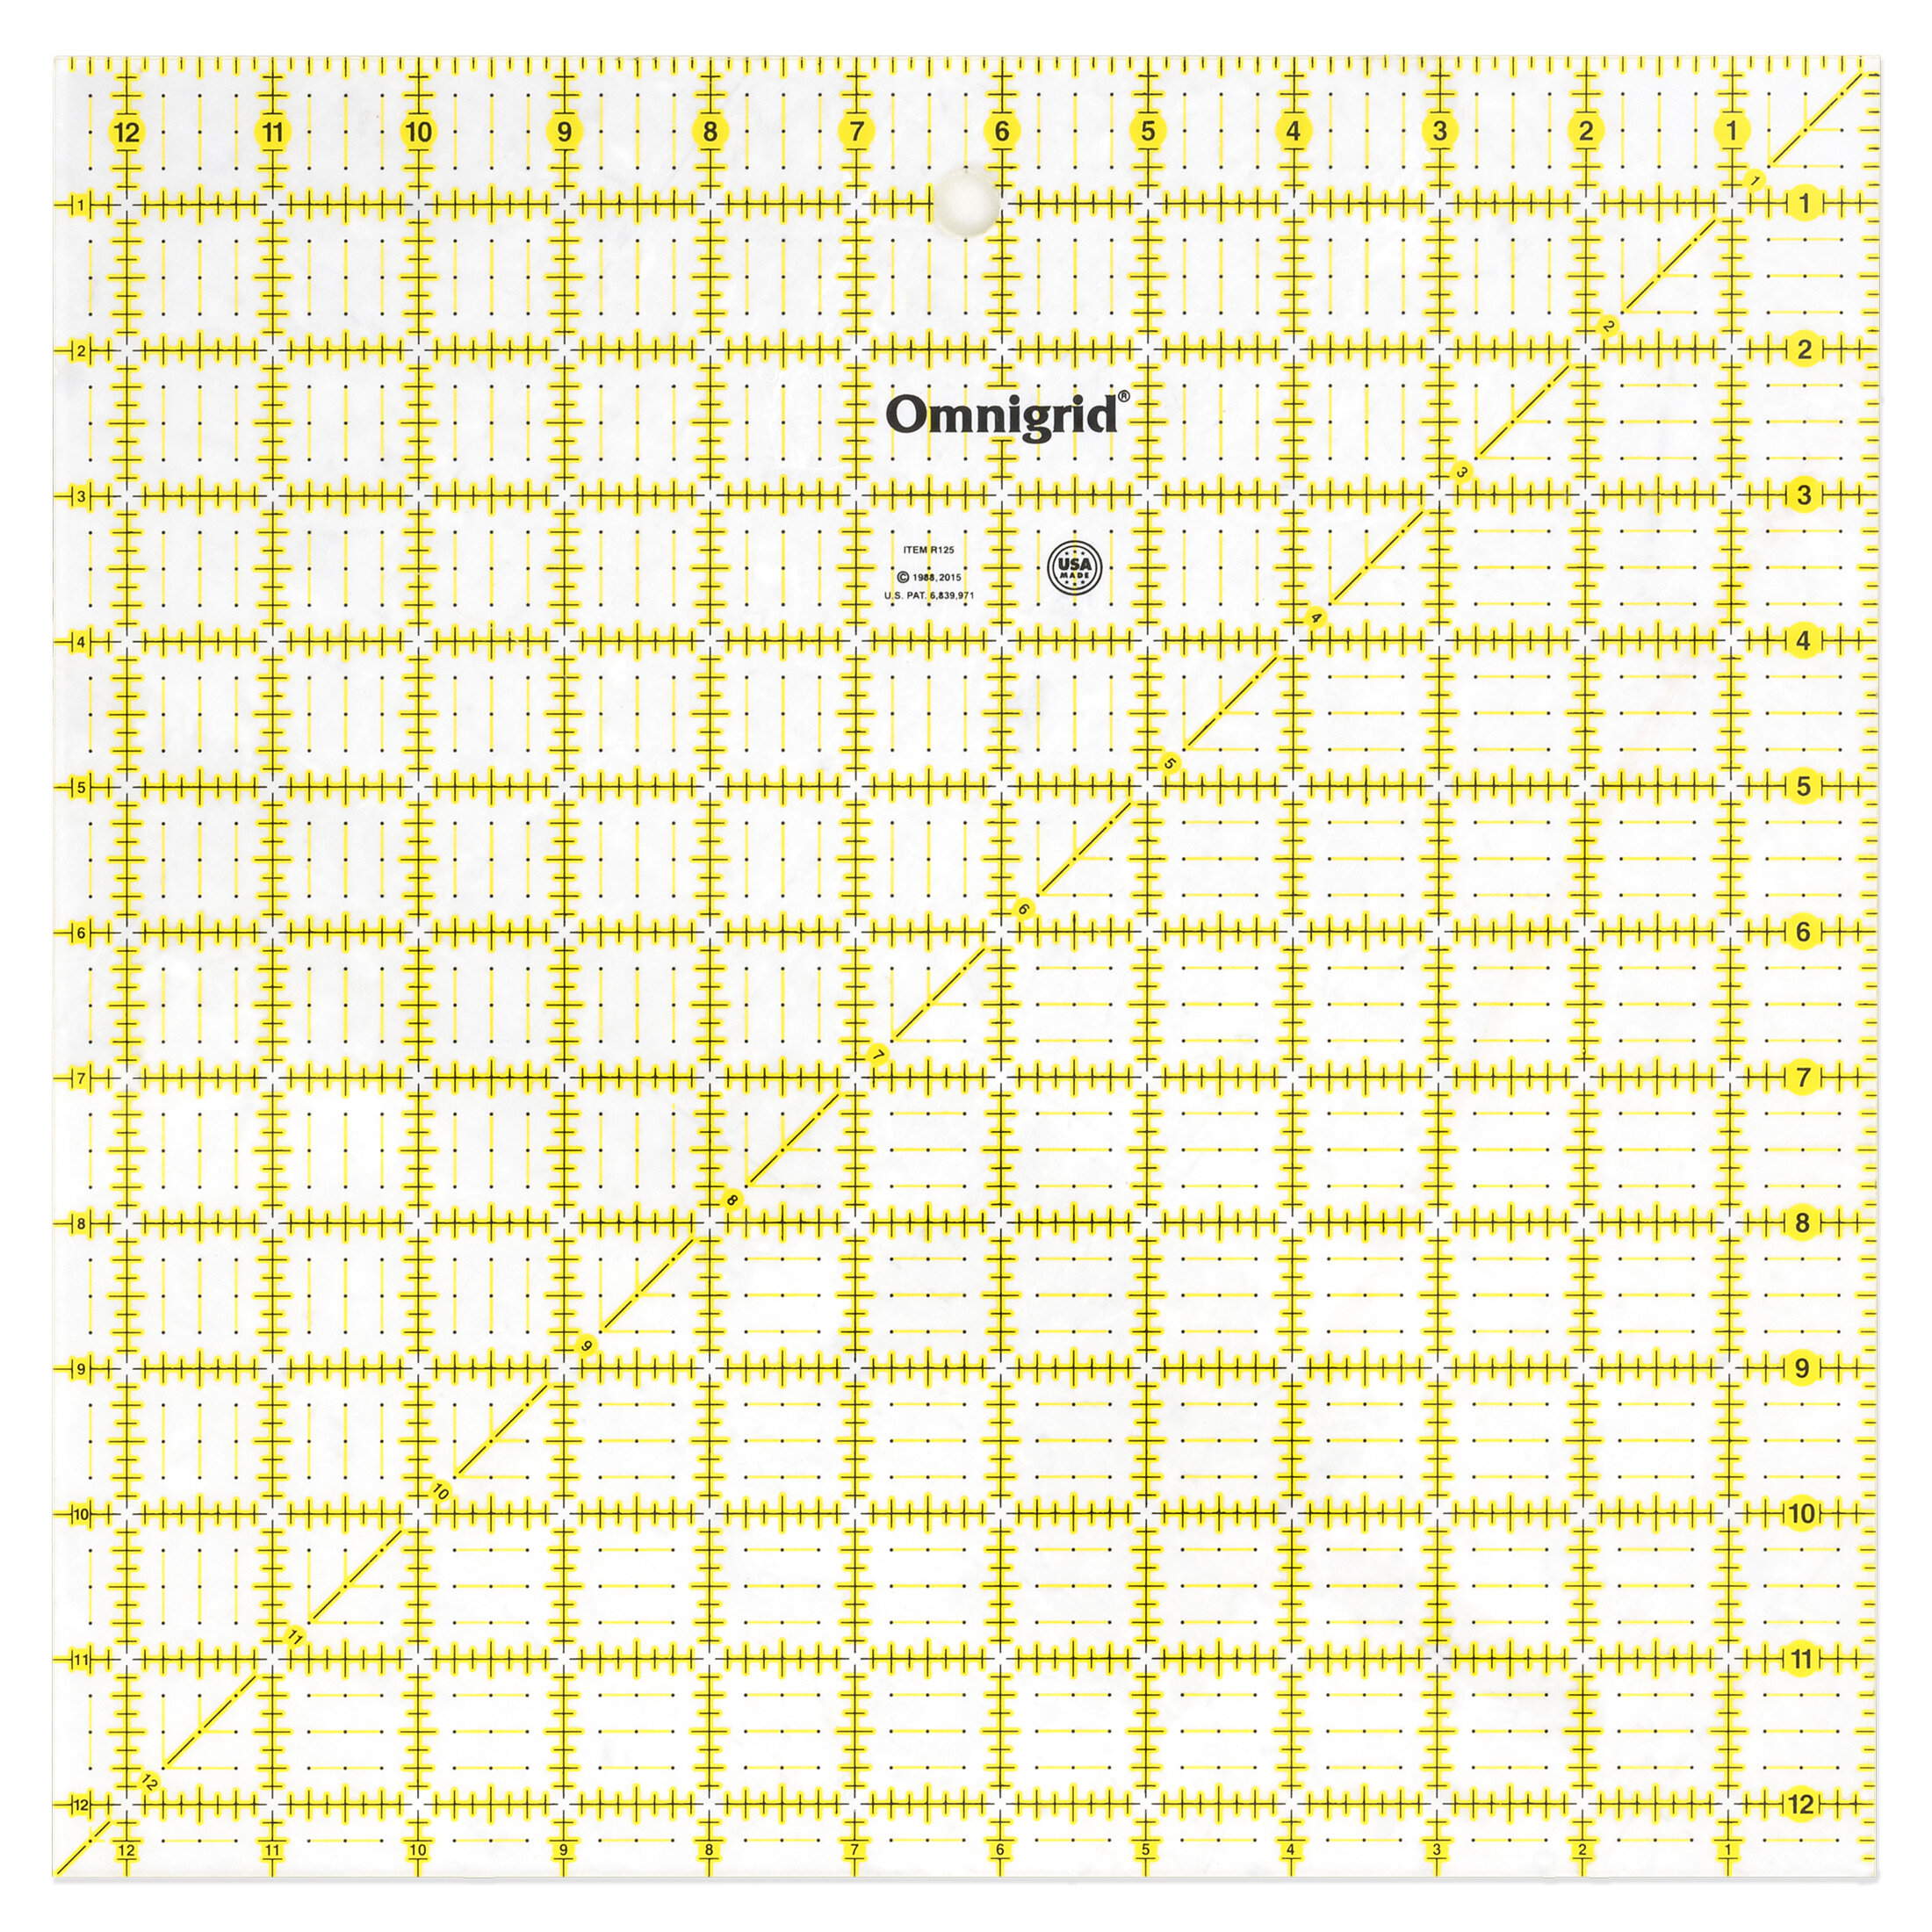 12.5 x 12.5 Inch Square, Shop our Square Quilting Ruler, Cutting Tools